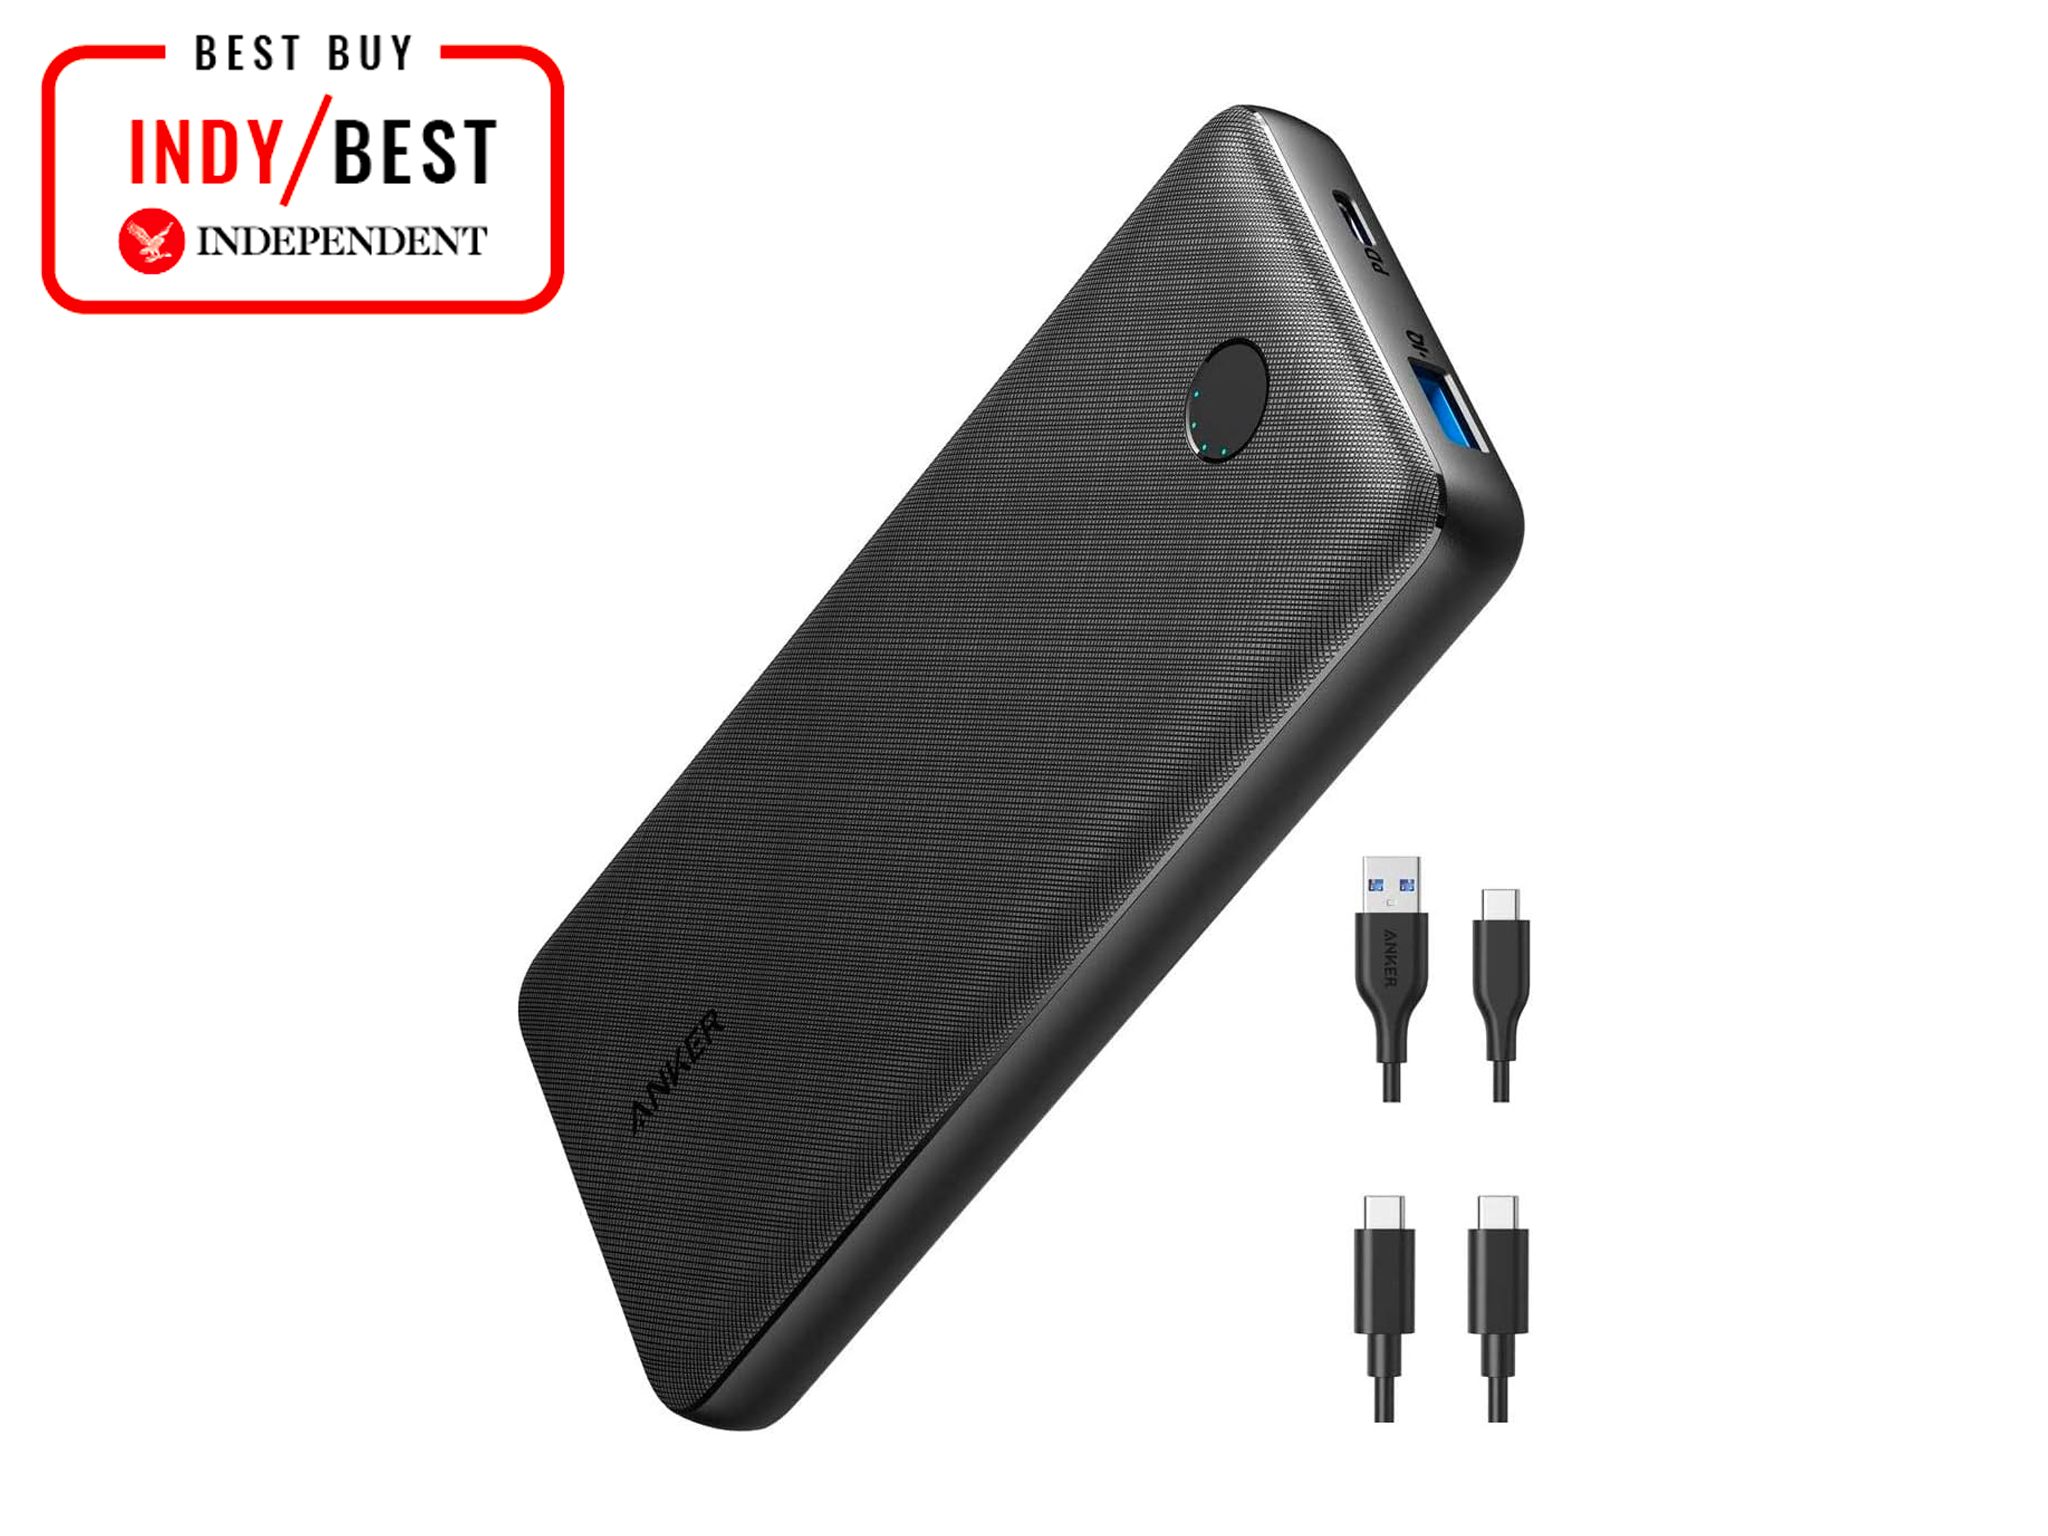 Anker-power-charger-indybest